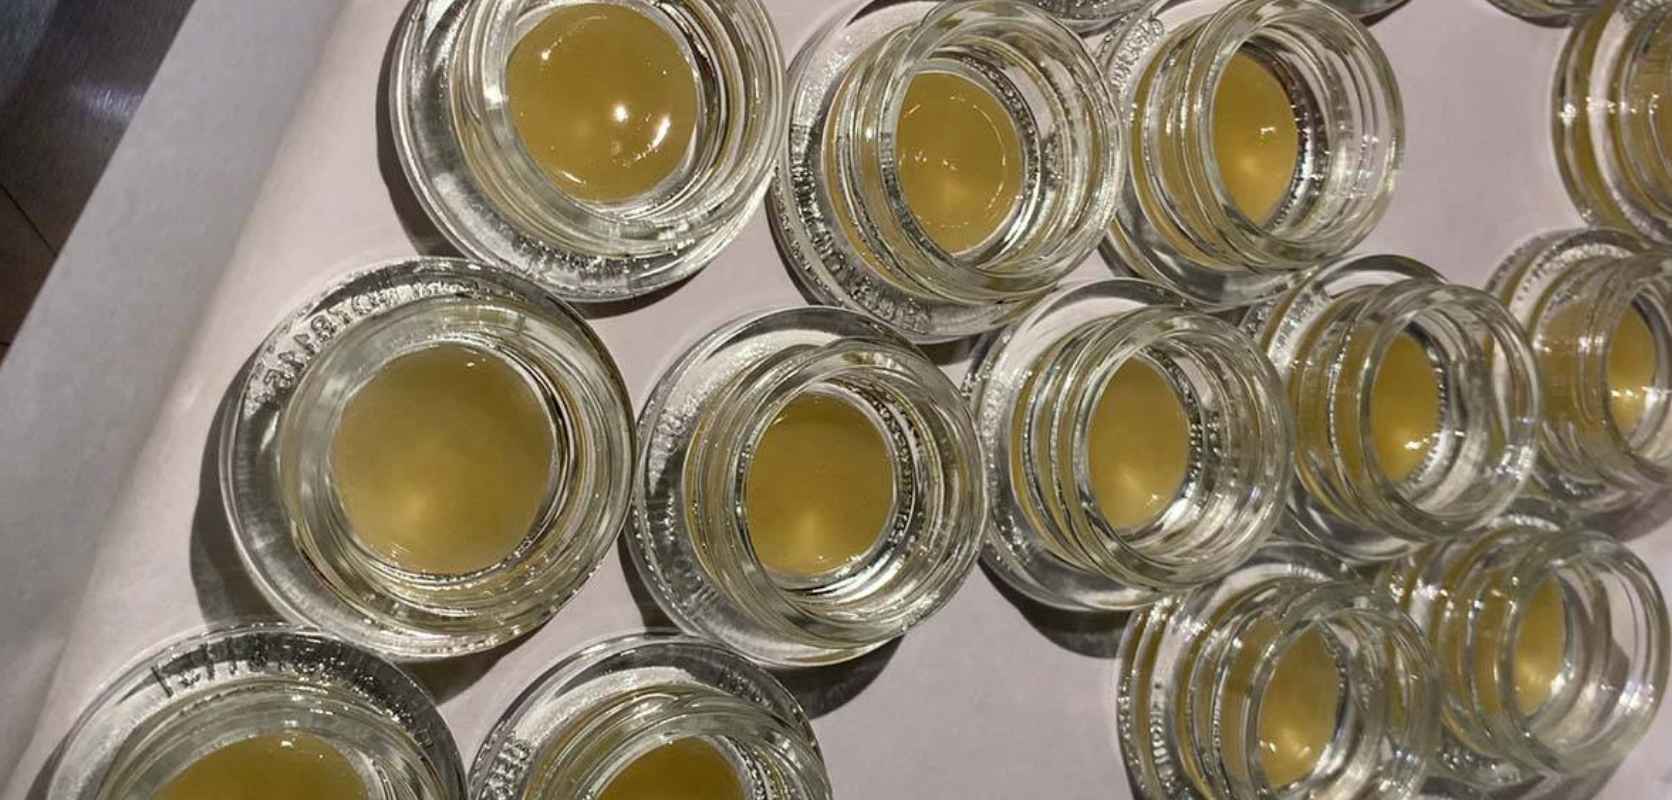 Now that you know how to make live rosin, If you've decided to make your own rosin hash, start off with some value buds from our online dispensary. 